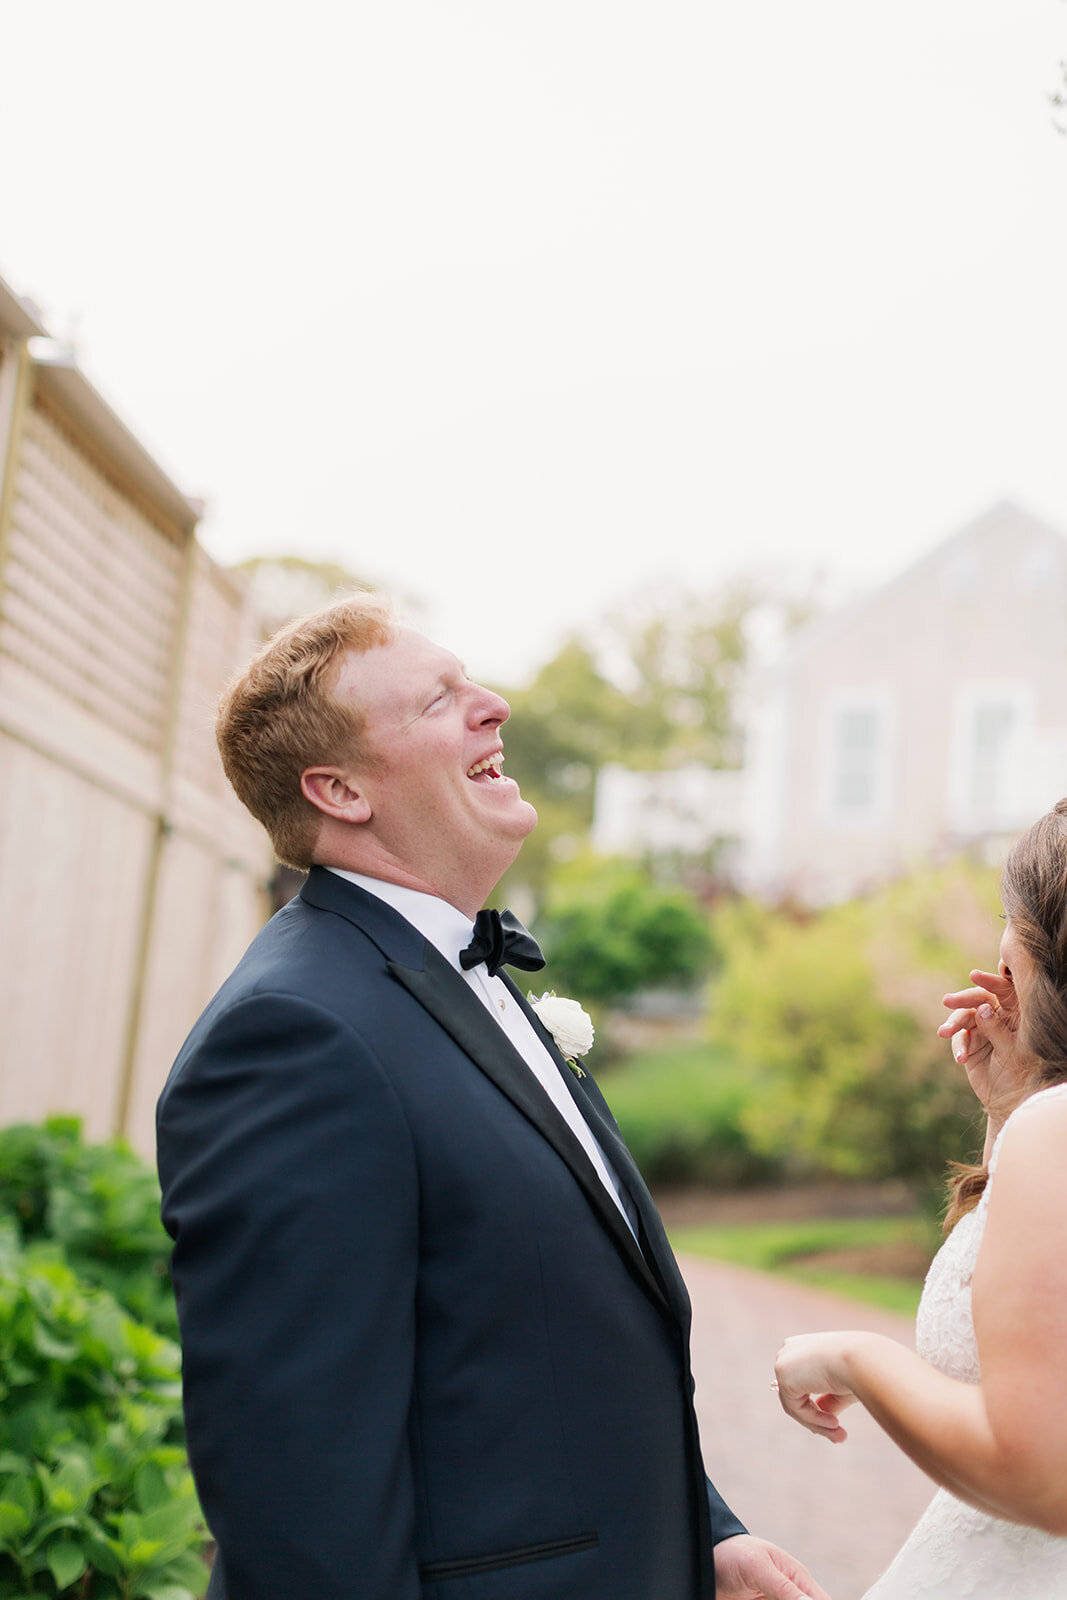 Man laughing as a bride stands in front of him.